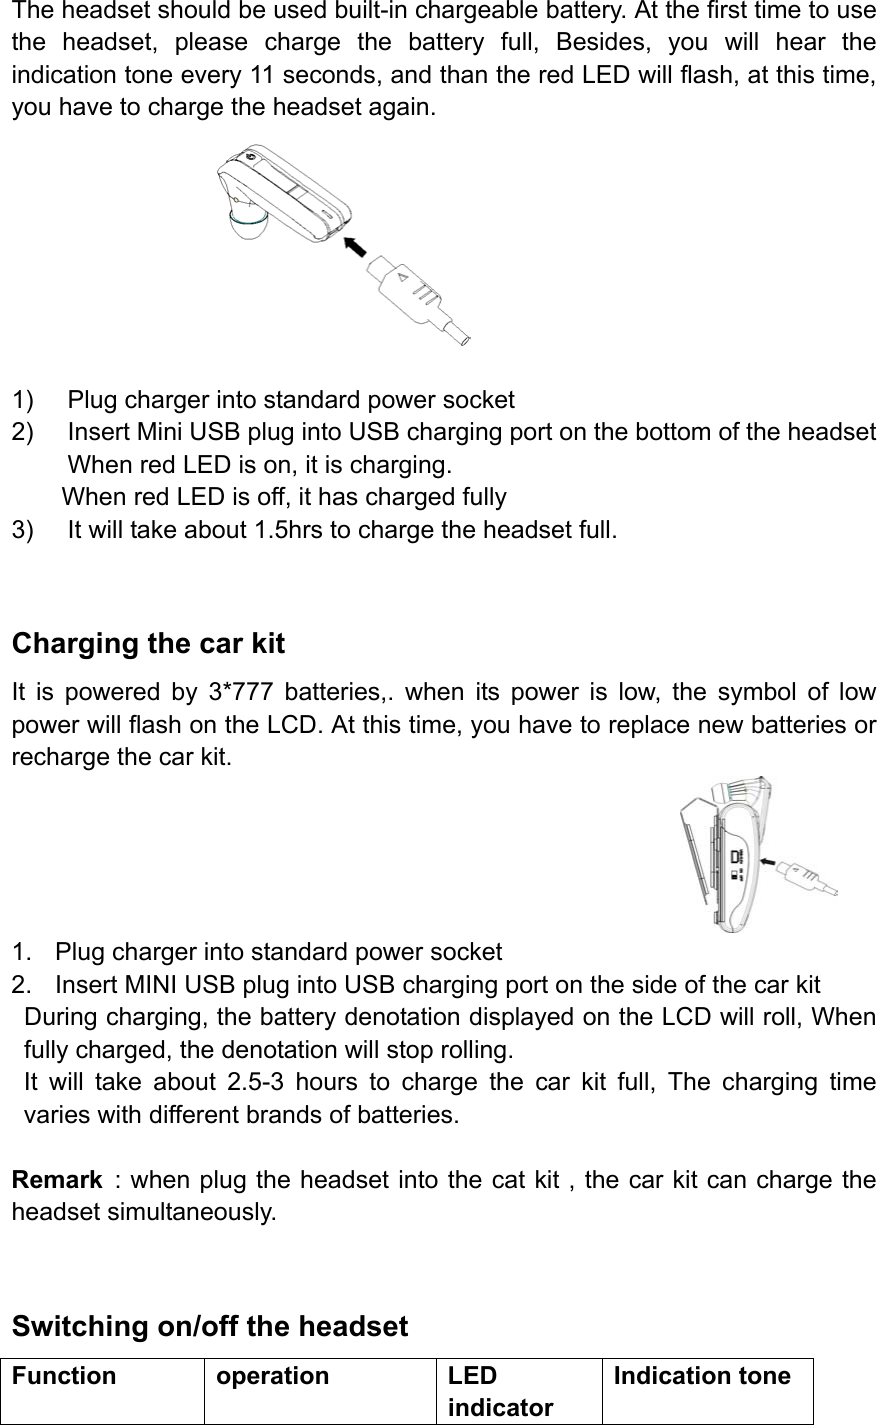 The headset should be used built-in chargeable battery. At the first time to use the headset, please charge the battery full, Besides, you will hear the indication tone every 11 seconds, and than the red LED will flash, at this time, you have to charge the headset again.         1)  Plug charger into standard power socket 2)  Insert Mini USB plug into USB charging port on the bottom of the headset When red LED is on, it is charging. When red LED is off, it has charged fully 3)  It will take about 1.5hrs to charge the headset full.  Charging the car kit   It is powered by 3*777 batteries,. when its power is low, the symbol of low power will flash on the LCD. At this time, you have to replace new batteries or recharge the car kit.  1.  Plug charger into standard power socket 2.  Insert MINI USB plug into USB charging port on the side of the car kit During charging, the battery denotation displayed on the LCD will roll, When fully charged, the denotation will stop rolling. It will take about 2.5-3 hours to charge the car kit full, The charging time varies with different brands of batteries.  Remark : when plug the headset into the cat kit , the car kit can charge the headset simultaneously.  Switching on/off the headset Function operation  LED indicator Indication tone 